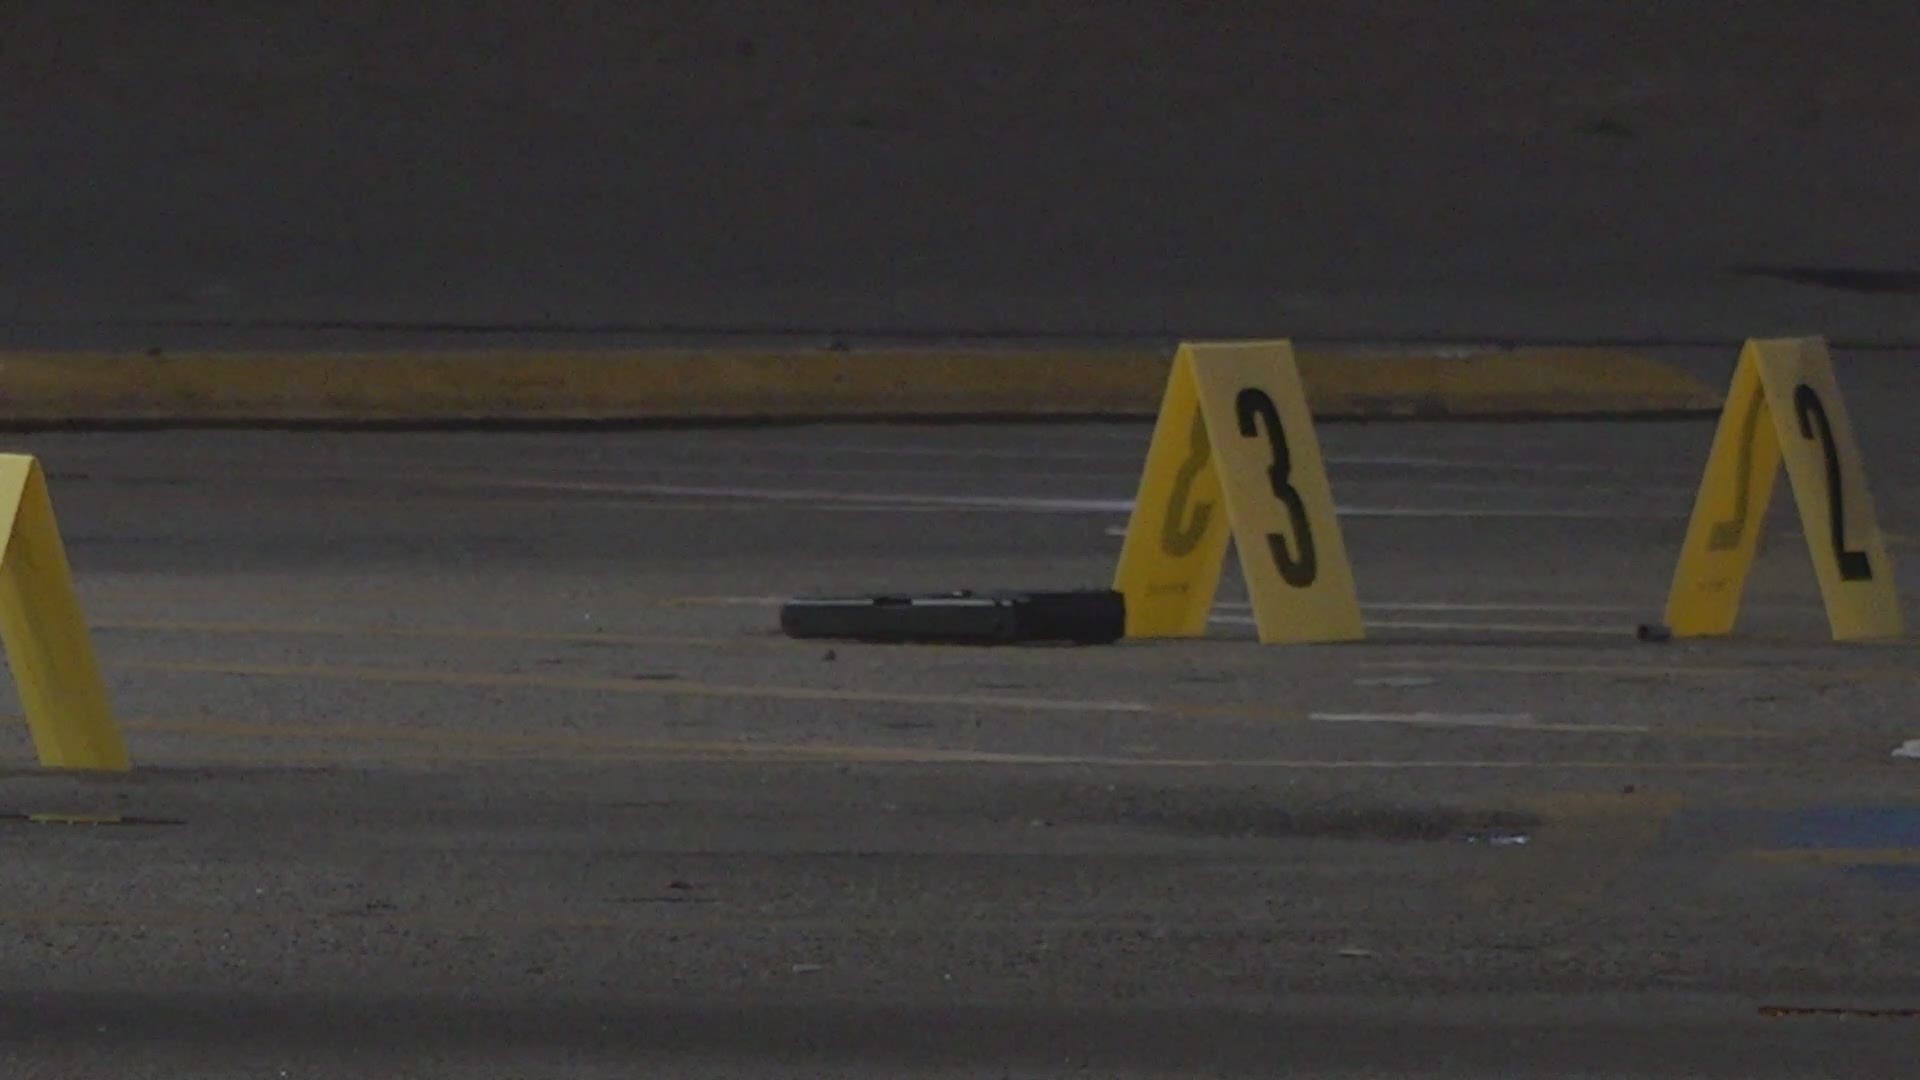 Two teenagers were shot by a security guard after deputies said they attempted to rob a Walgreens in north Harris County. One of the teenagers was shot multiple times and later died at the hospital.